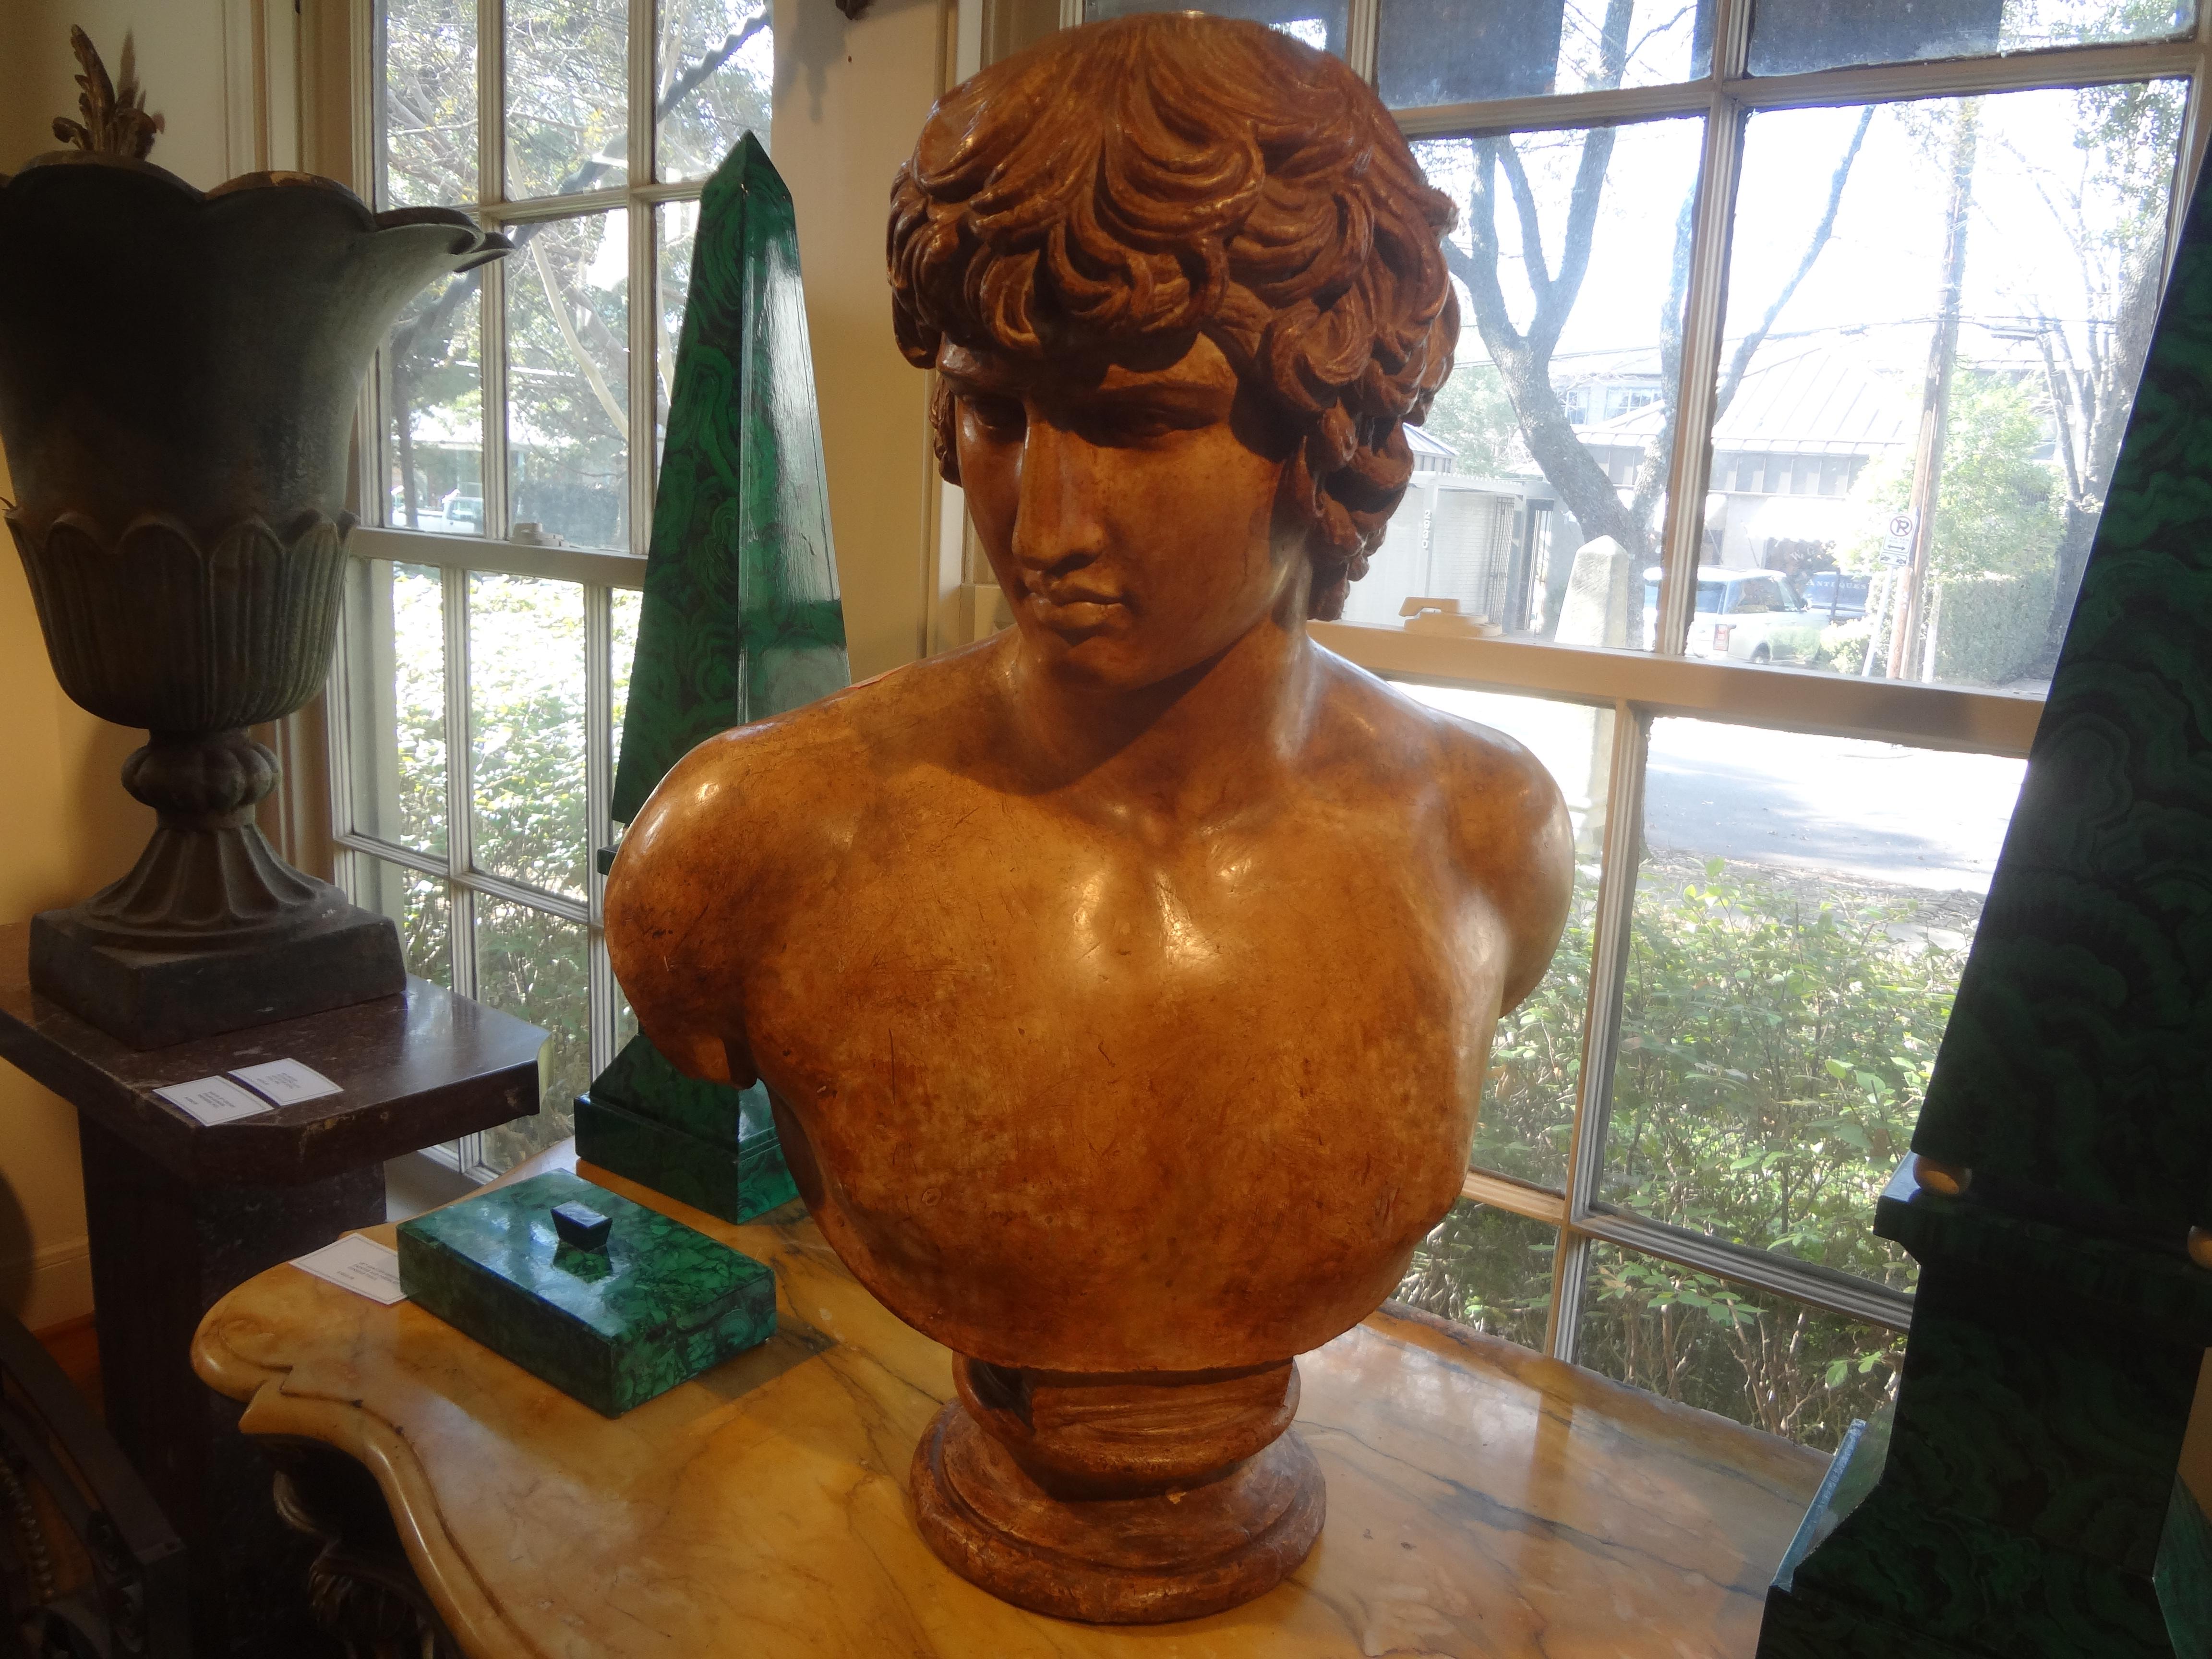 19th century Italian terracotta bust of a classical male.
This monumental antique Italian terracotta bust sculpture of a classical Roman male is a
well executed statement piece and would look great on a pedestal, console table or
credenza.